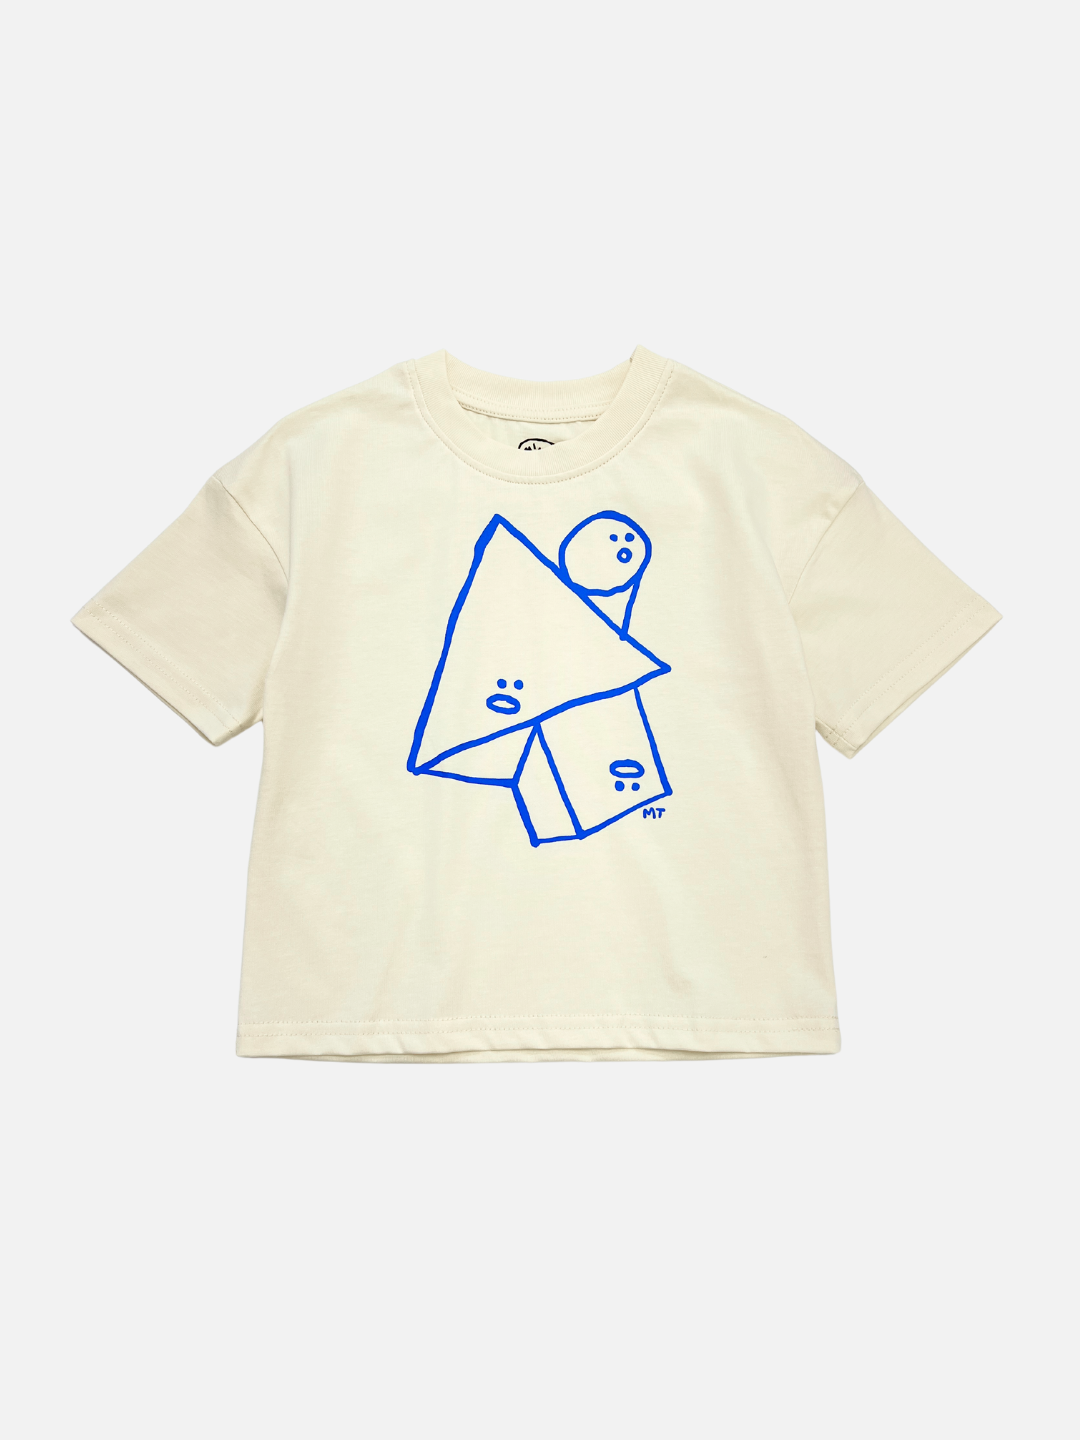 A front view of the kids' Jumble Tee with blue shapes outline with funny faces in the center.